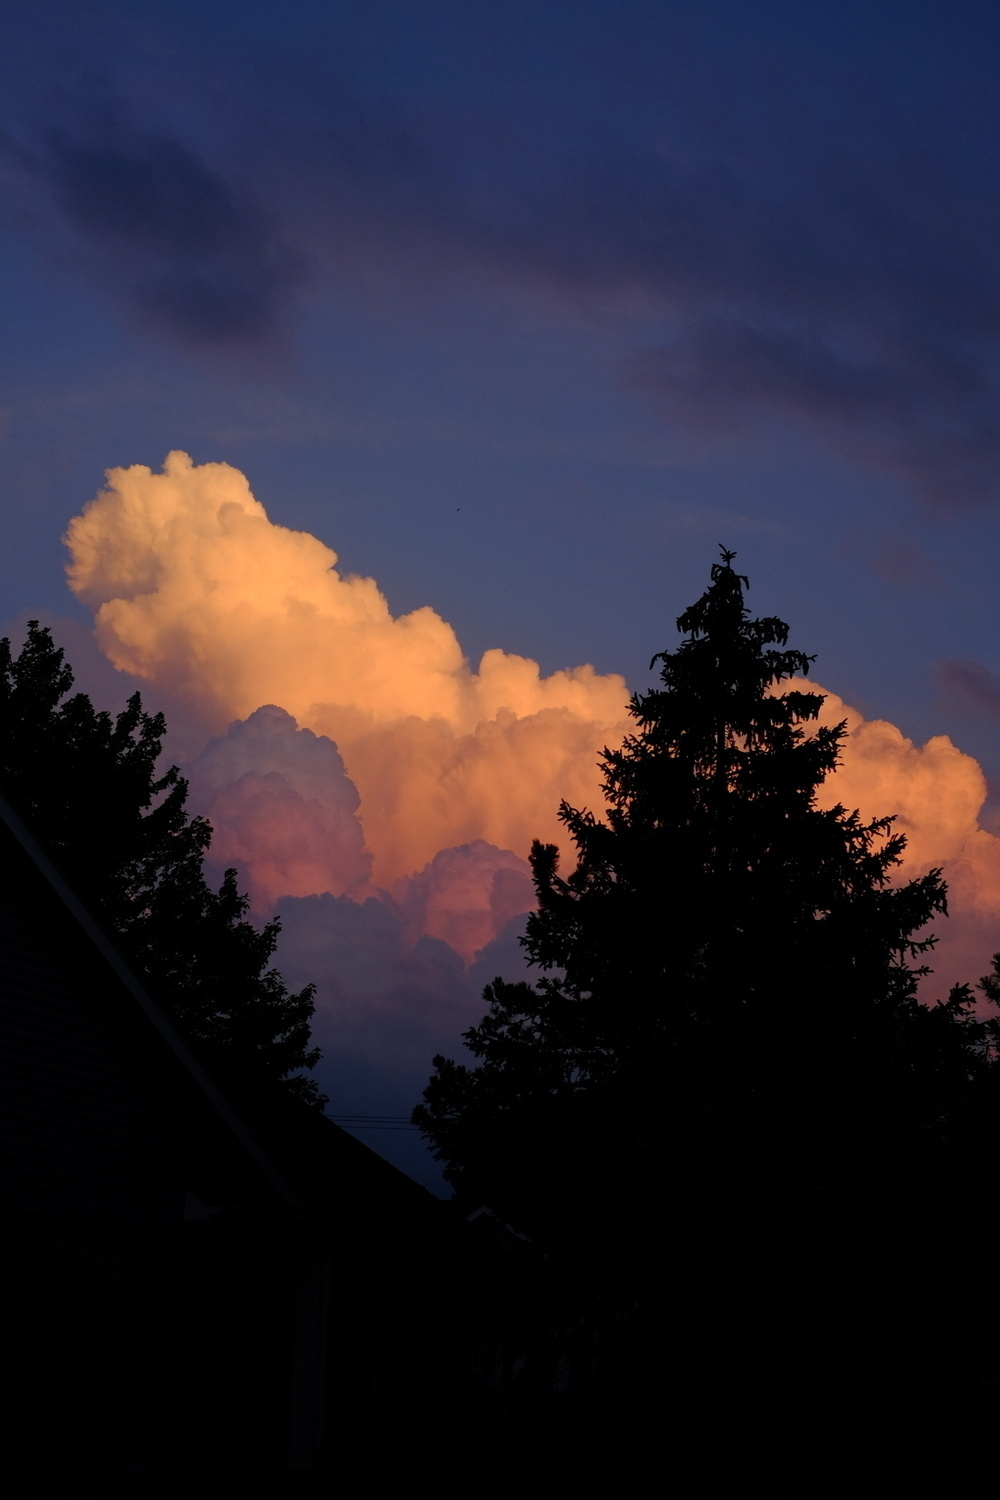 Tree silhouettes with dark orange clouds behind them. The sky is a dark blue at sunset